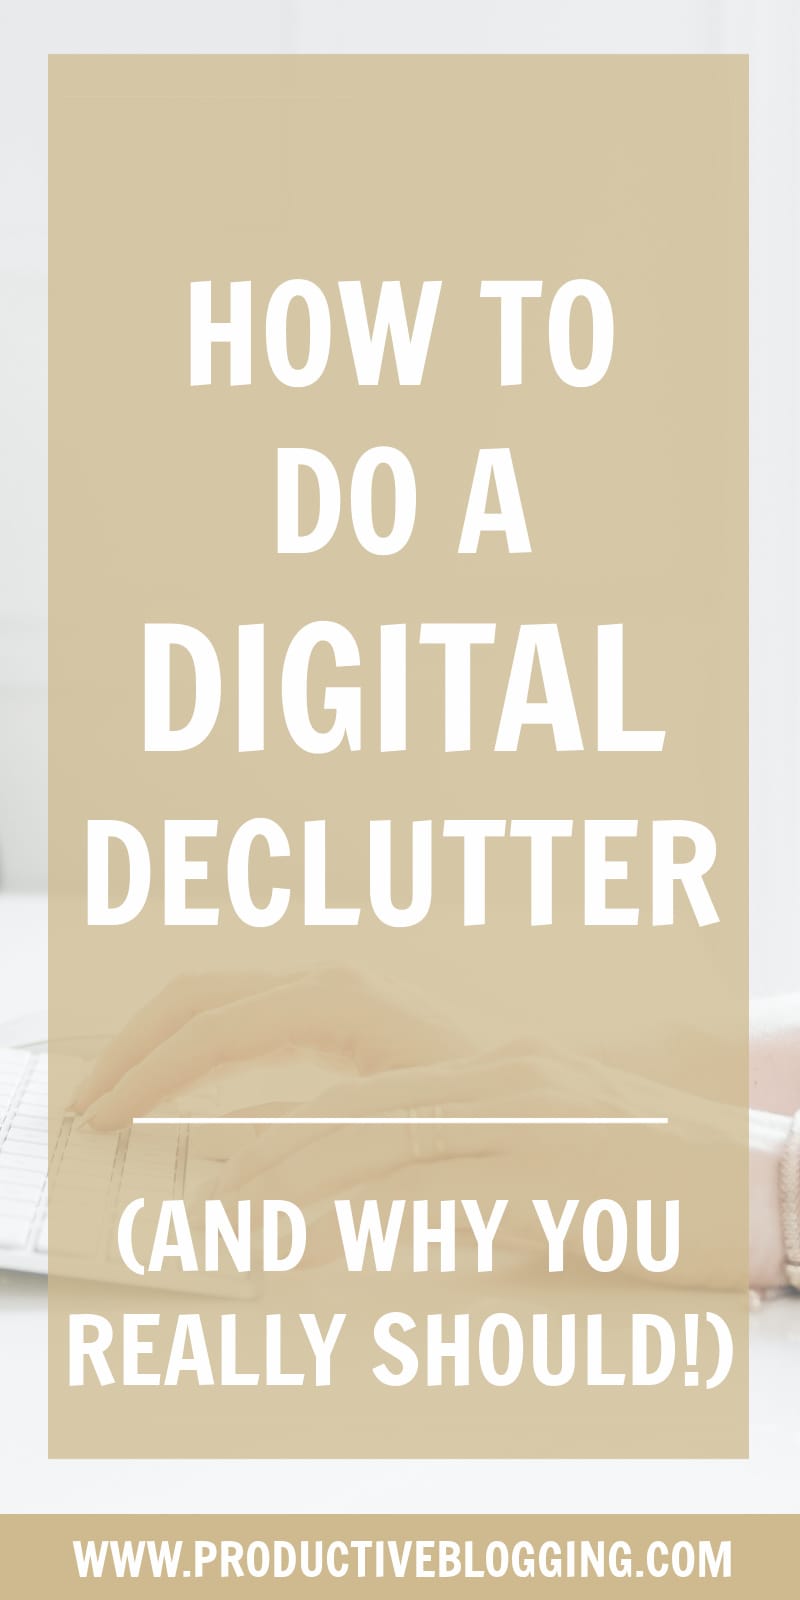 Tidy your digital devices, organize your files and folders, detox your inbox, declutter your social media and develop better digital habits to reduce stress, improve productivity and boost your creativity! Here’s how to do a digital declutter… #digitaldeclutter #digitaldetox #declutter #todolist #planning #timemanagement #efficiency #goals #blogginggoals #bloggingtips #bloggingbiz #solopreneur #organised #organized #productivity #productivitytips #productiveblogging #blogsmarternotharder #BSNH